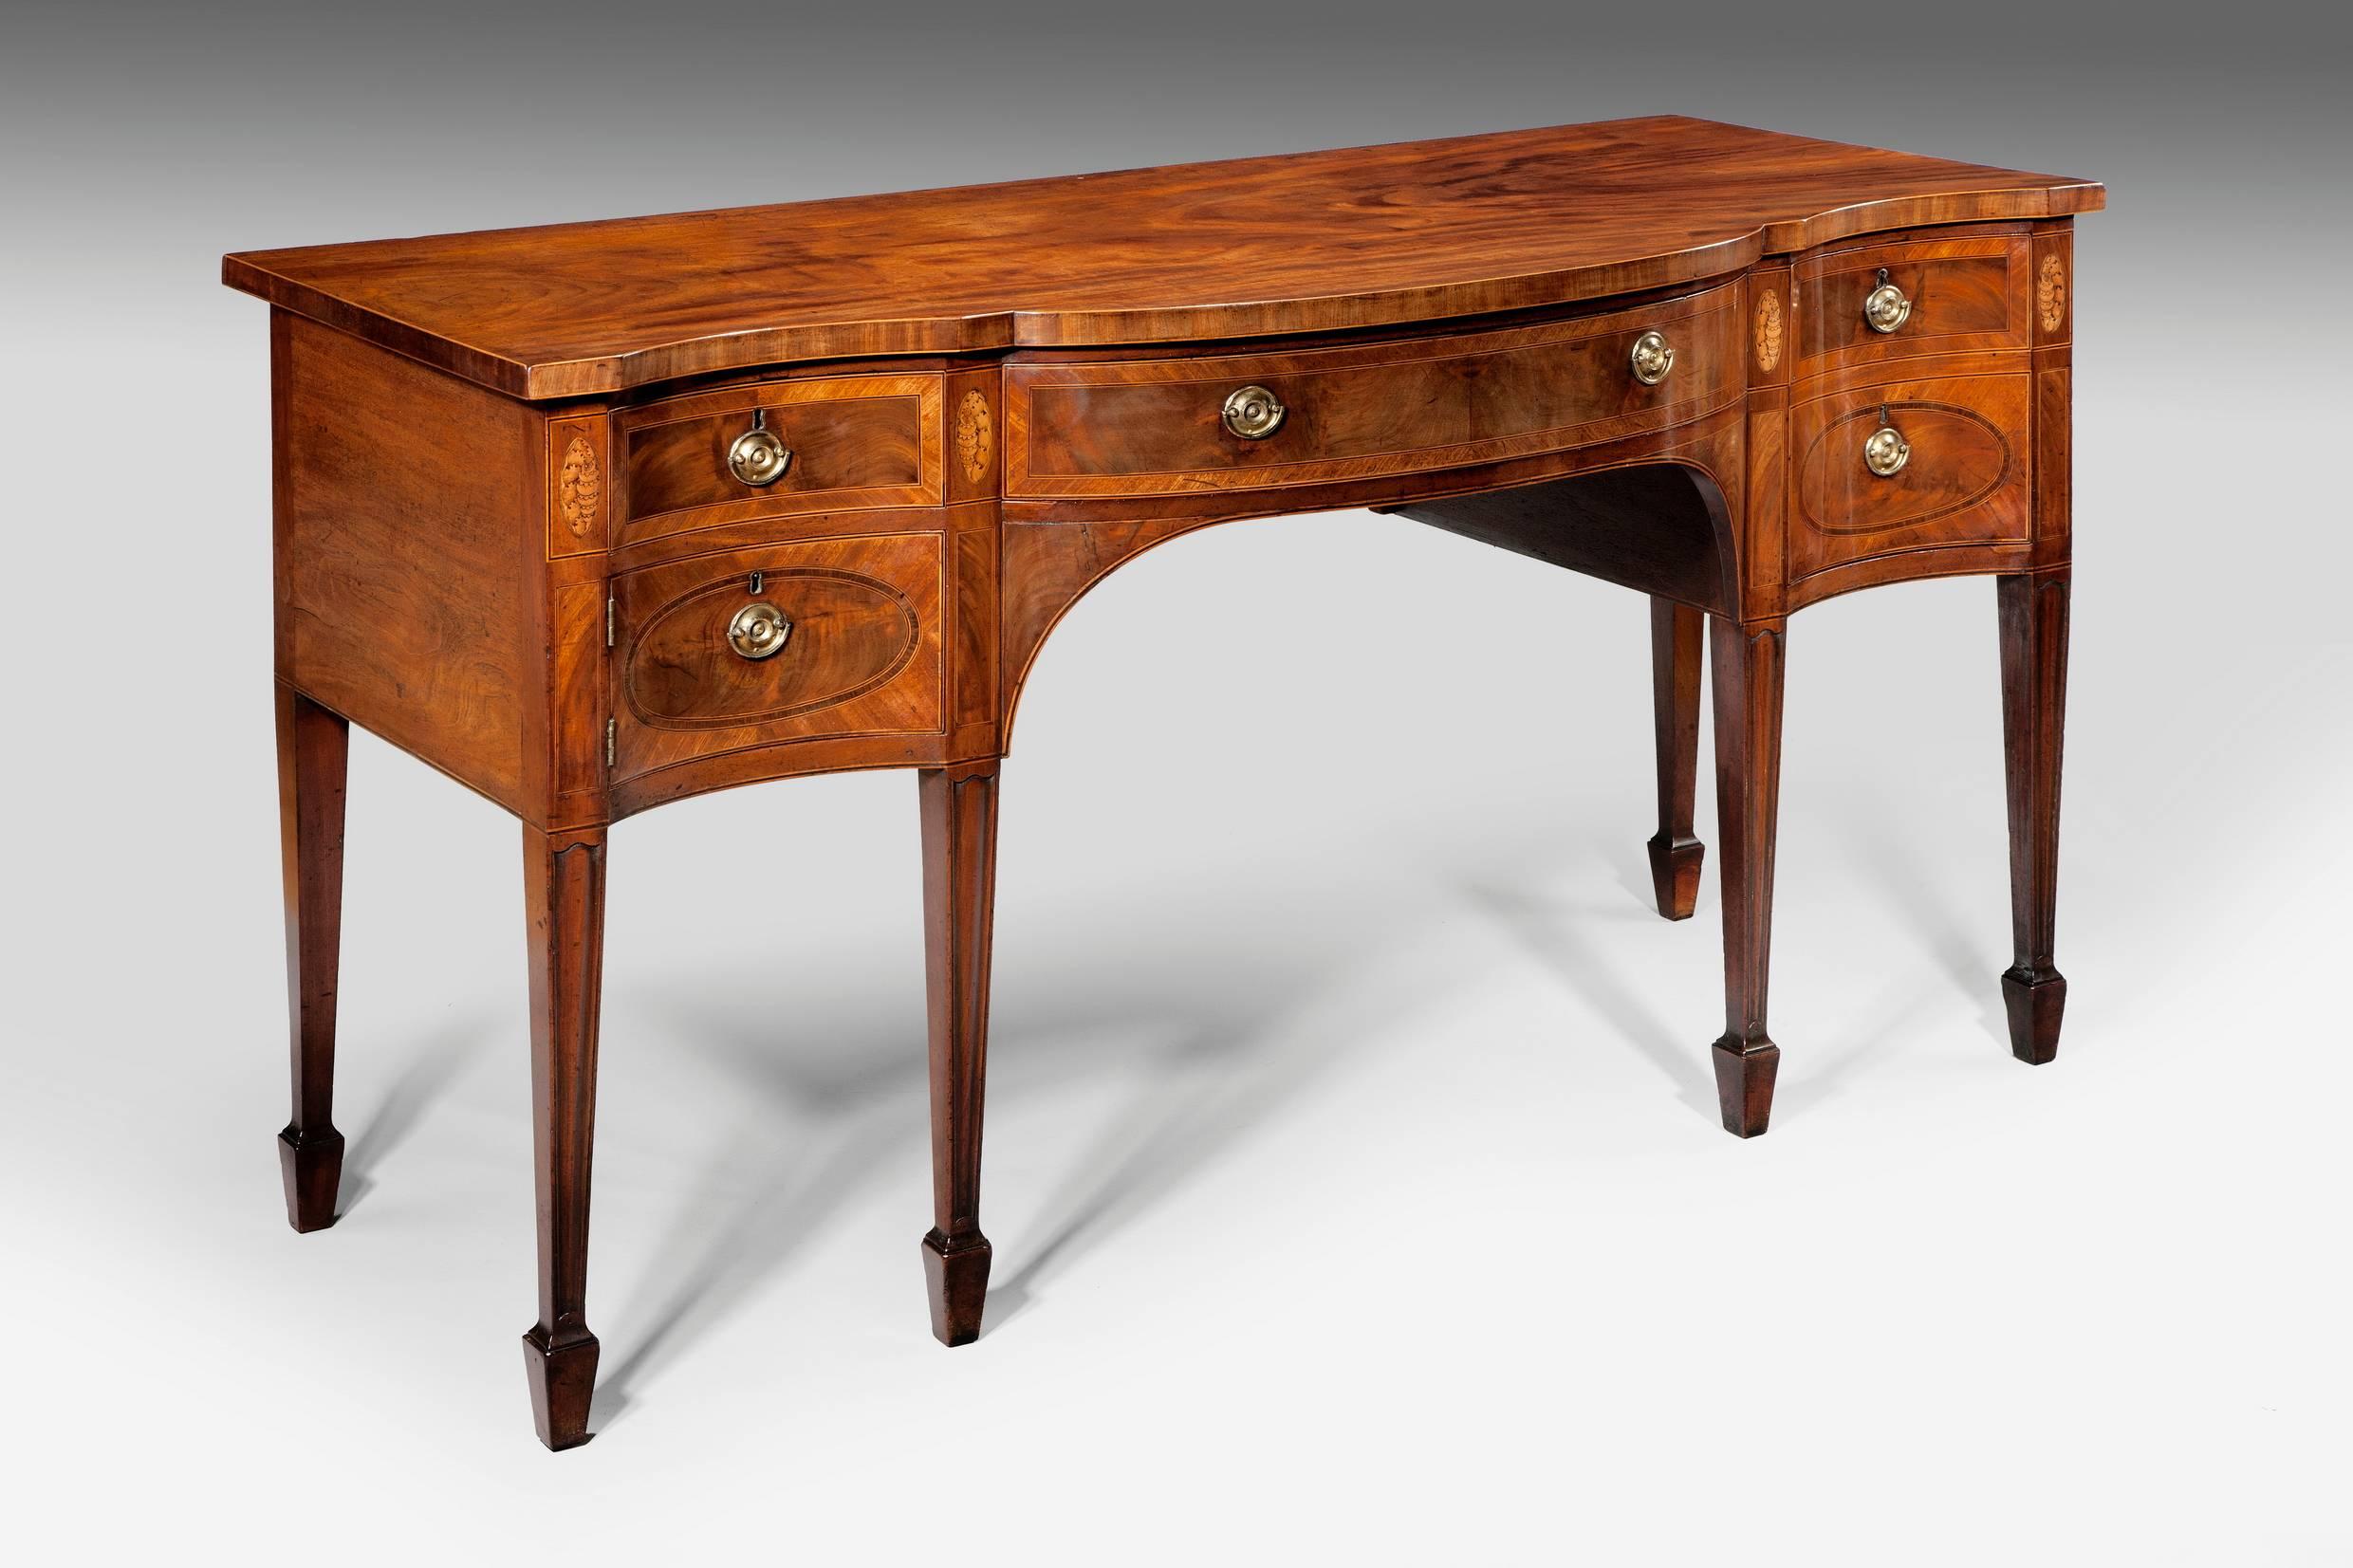 Made from best quality and well figured Cuban mahogany, this sideboard is feather banded throughout on the drawer fronts and retains the original decorative marquetry inlay. It has a central drawer, a deep cellaret drawer and an opening cupboard